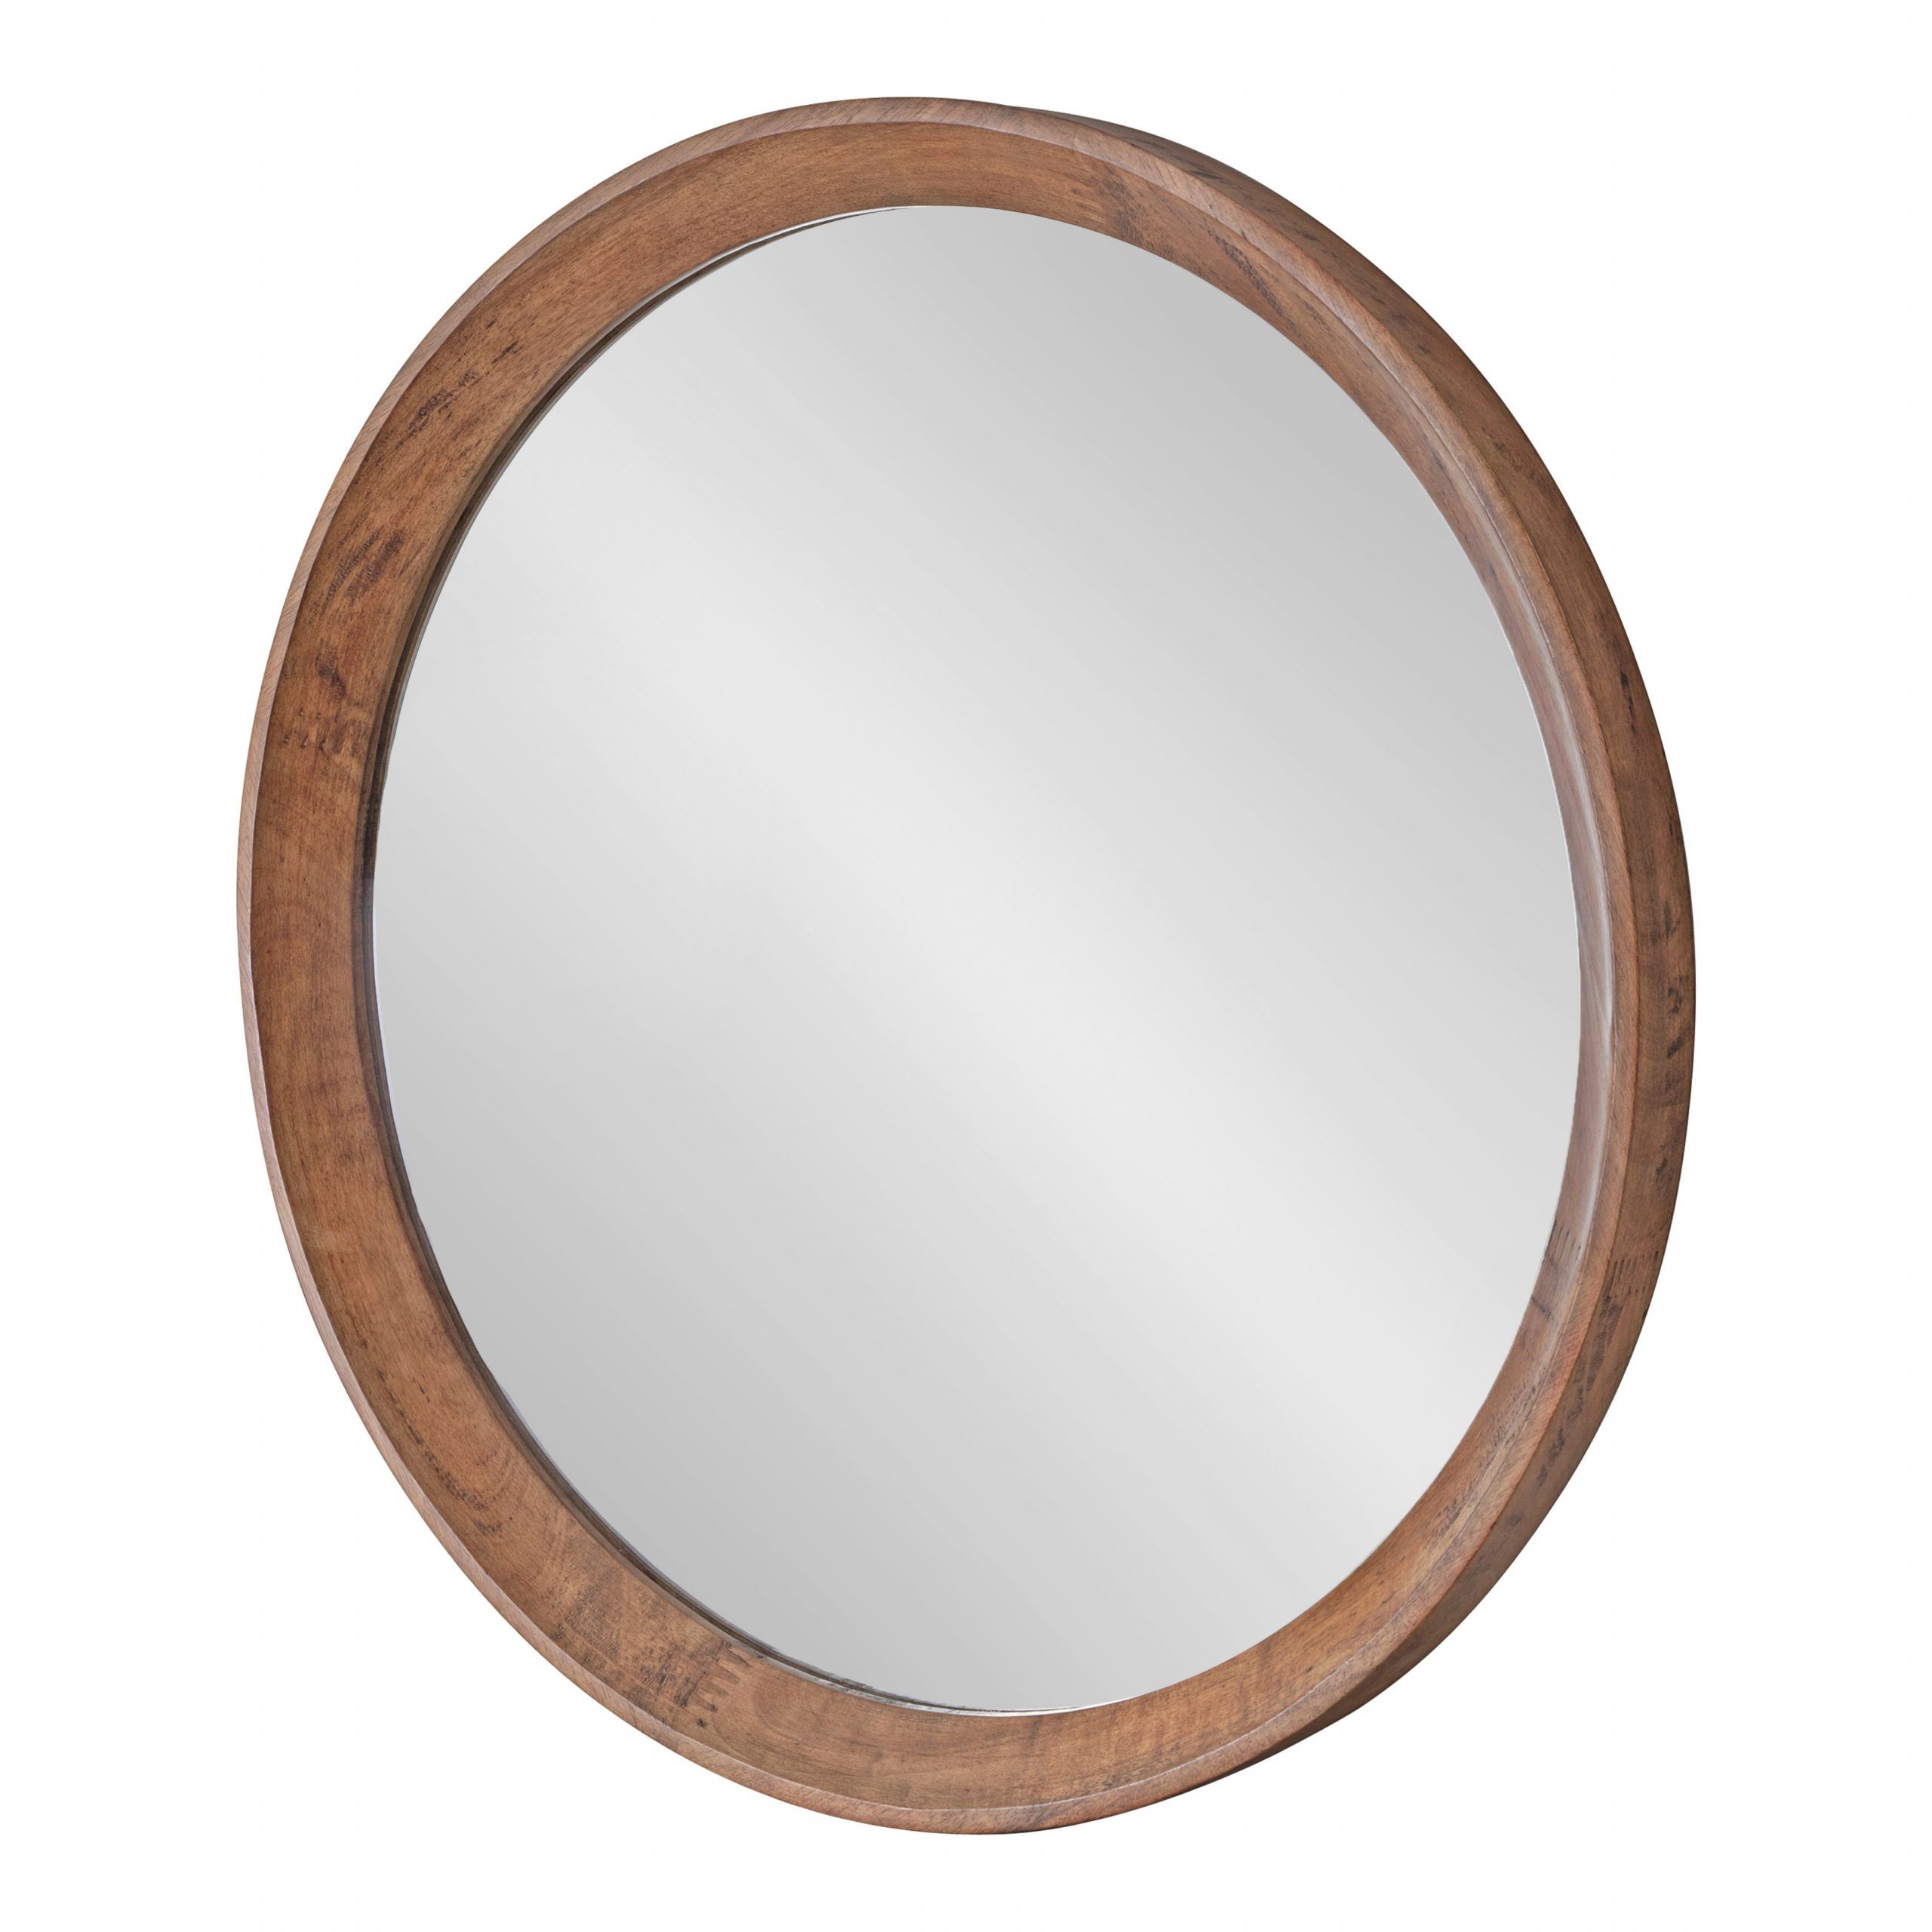 2020 Mocha Brown Wall Mirrors Throughout Kate And Laurel Hartman Transitional Round Wood Framed Wall Mirror,  (View 1 of 15)